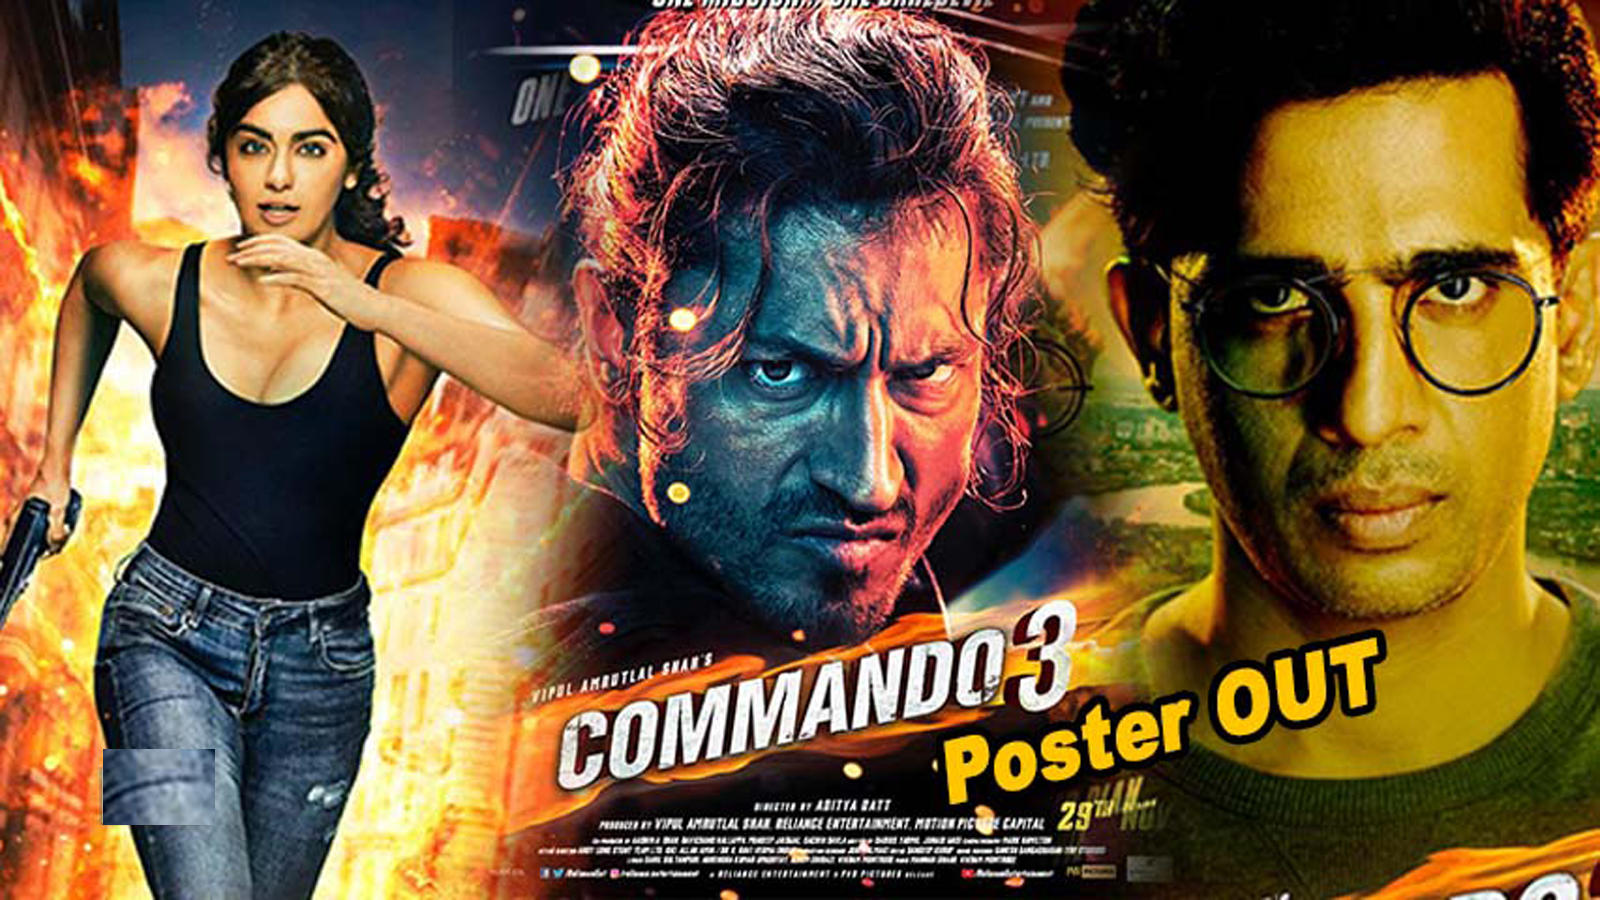 commando a one man army full mp4 movie download